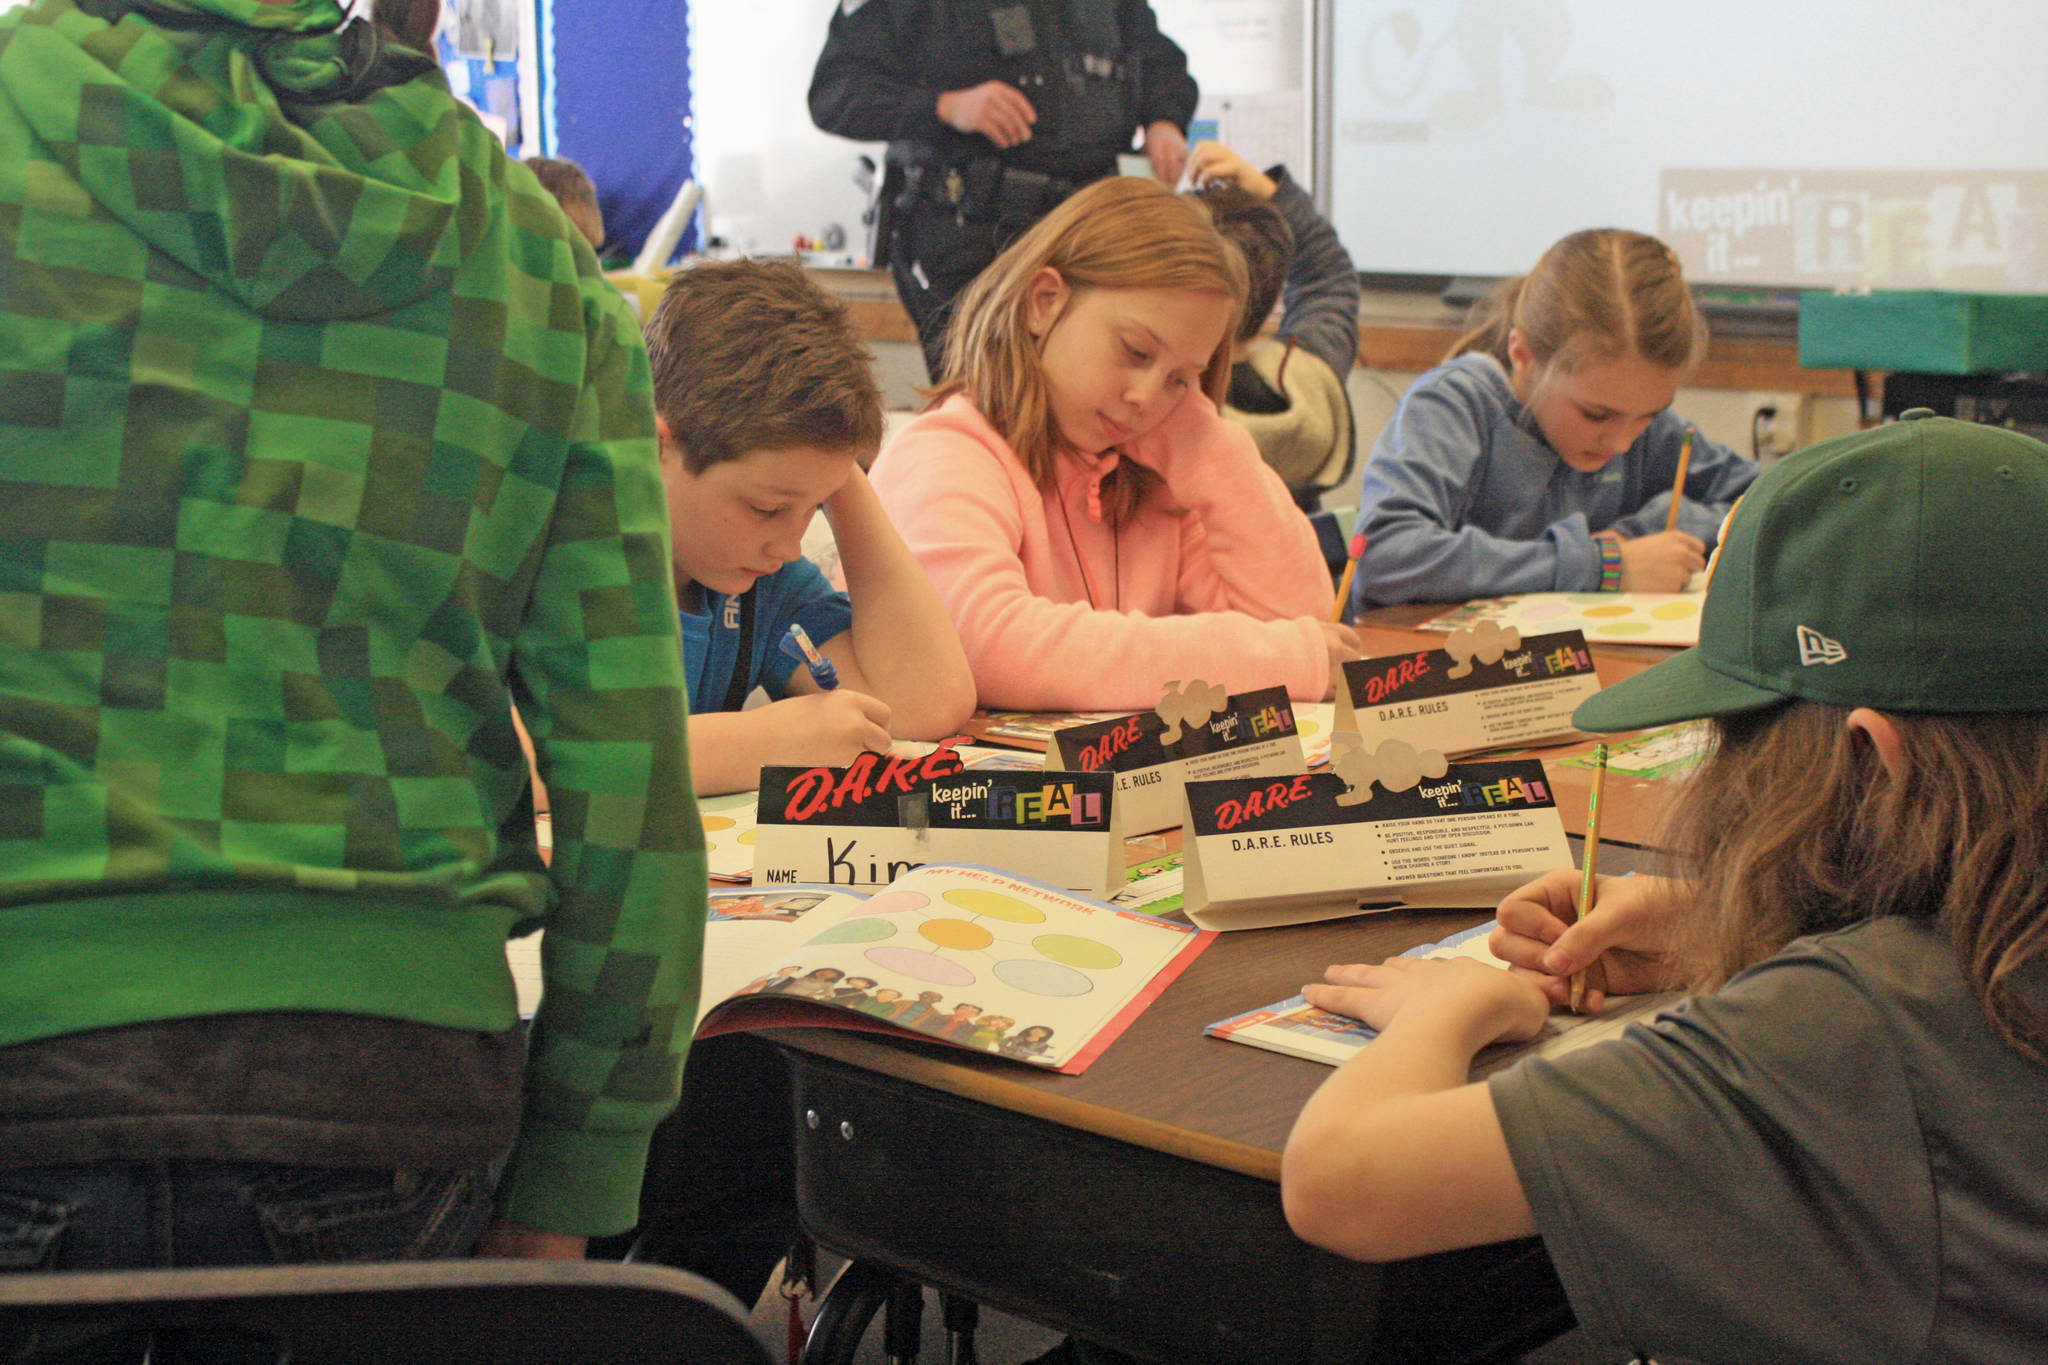 Fifth-graders fill out D.A.R.E. workbooks during a lesson at Soldotna Elementary School on Wednesday, Feb. 28. (Photo by Erin Thompson/Peninsula Clarion)